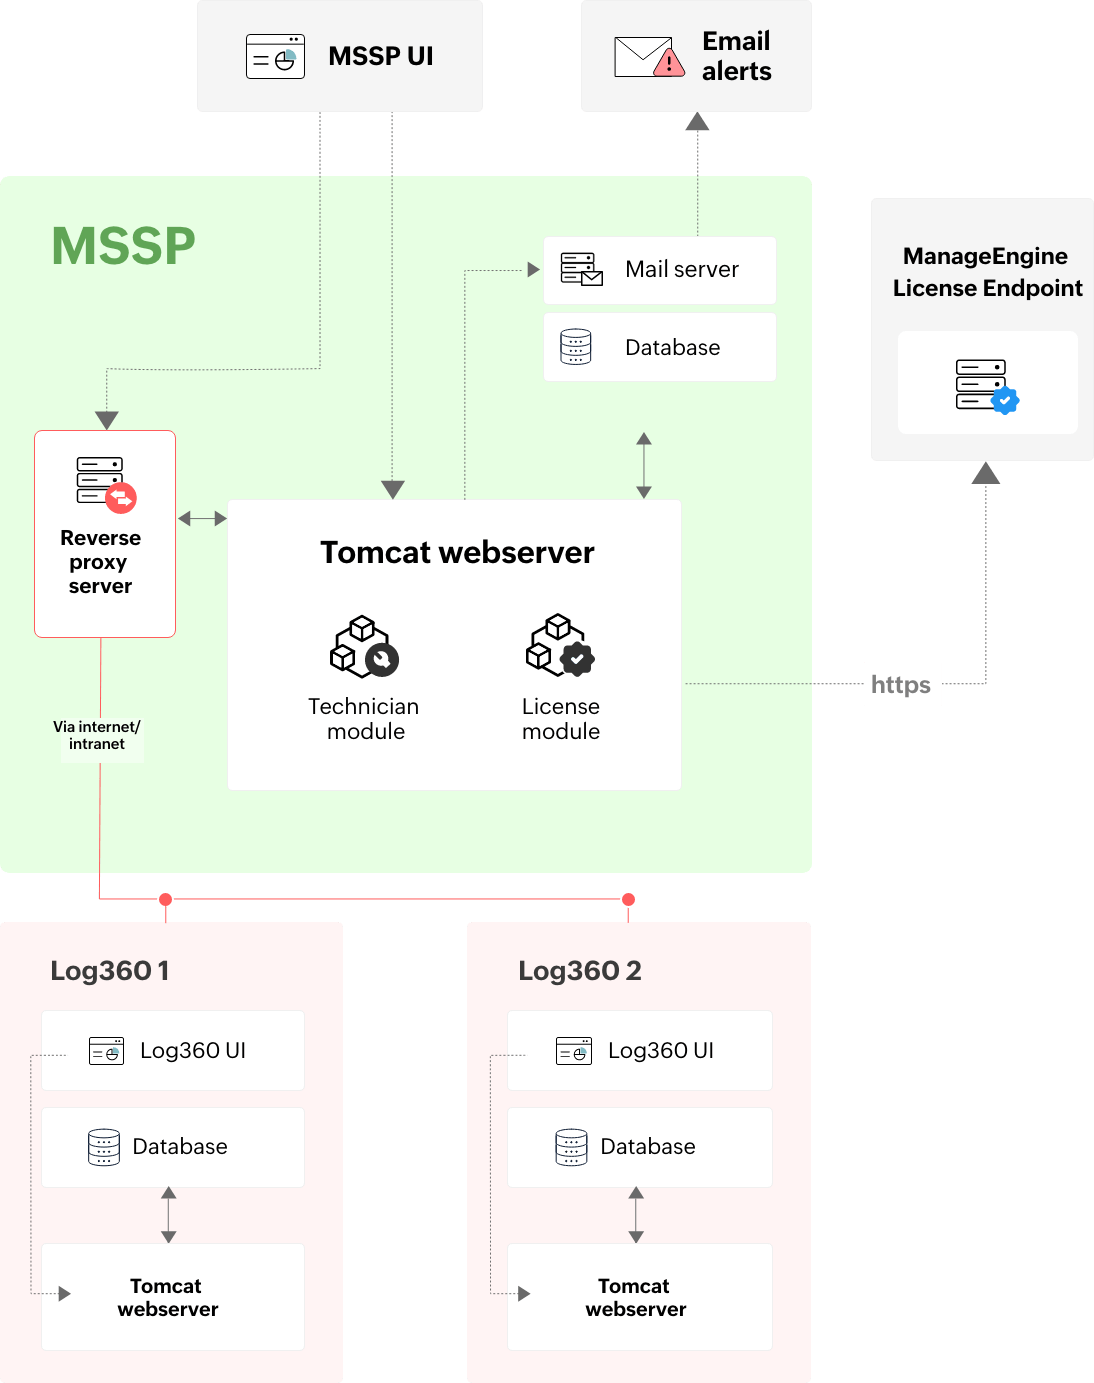 Log360 MSSP solutions architecture